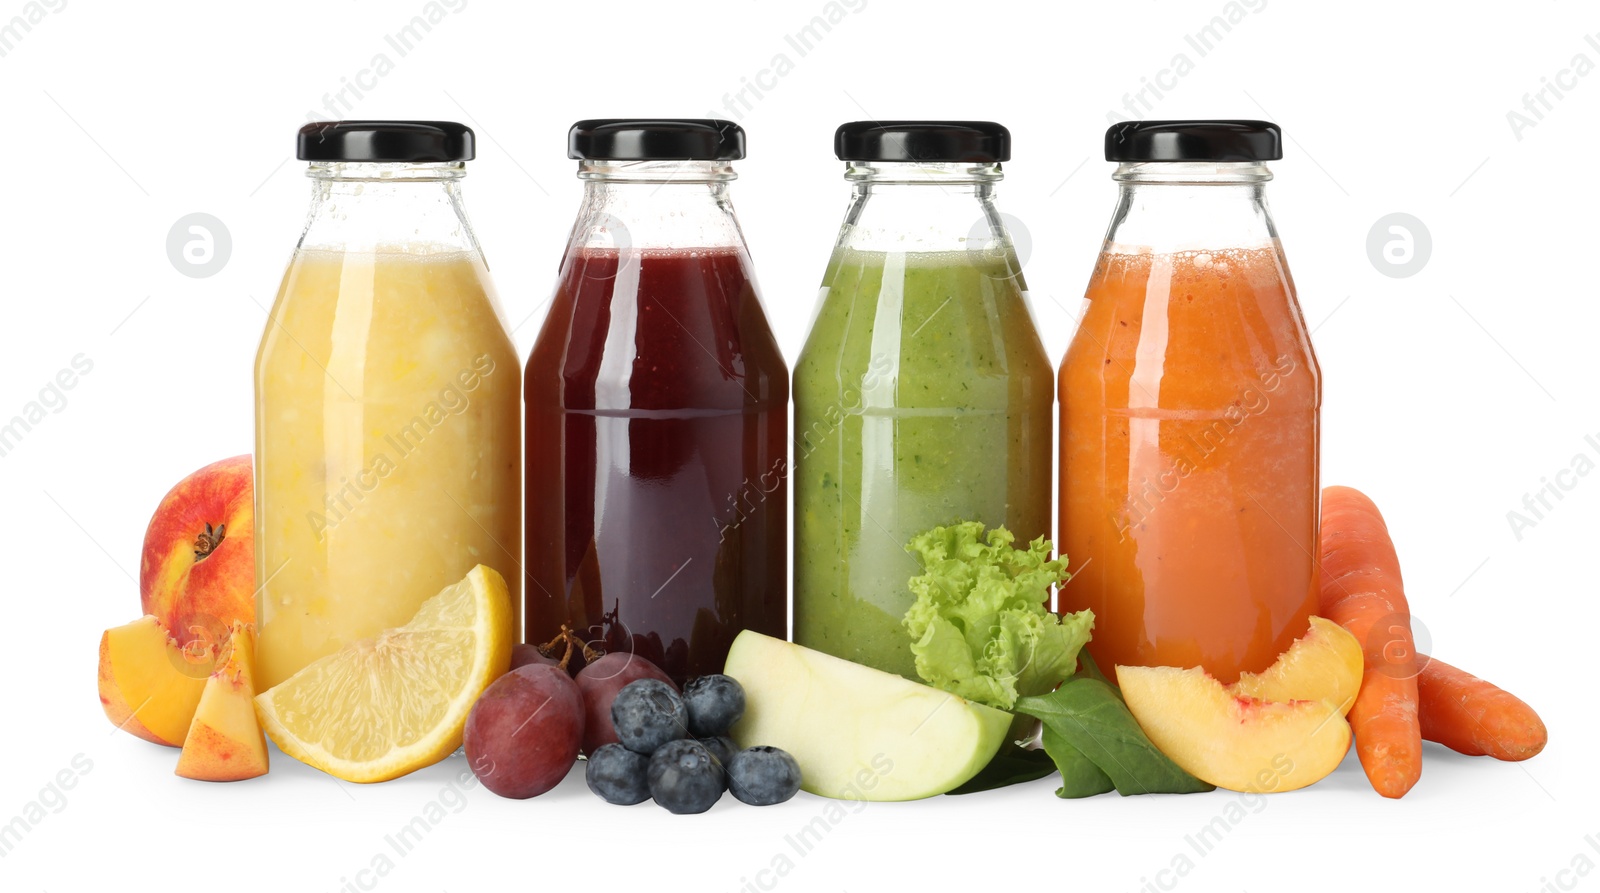 Photo of Bottles of delicious juices and fresh fruits on white background